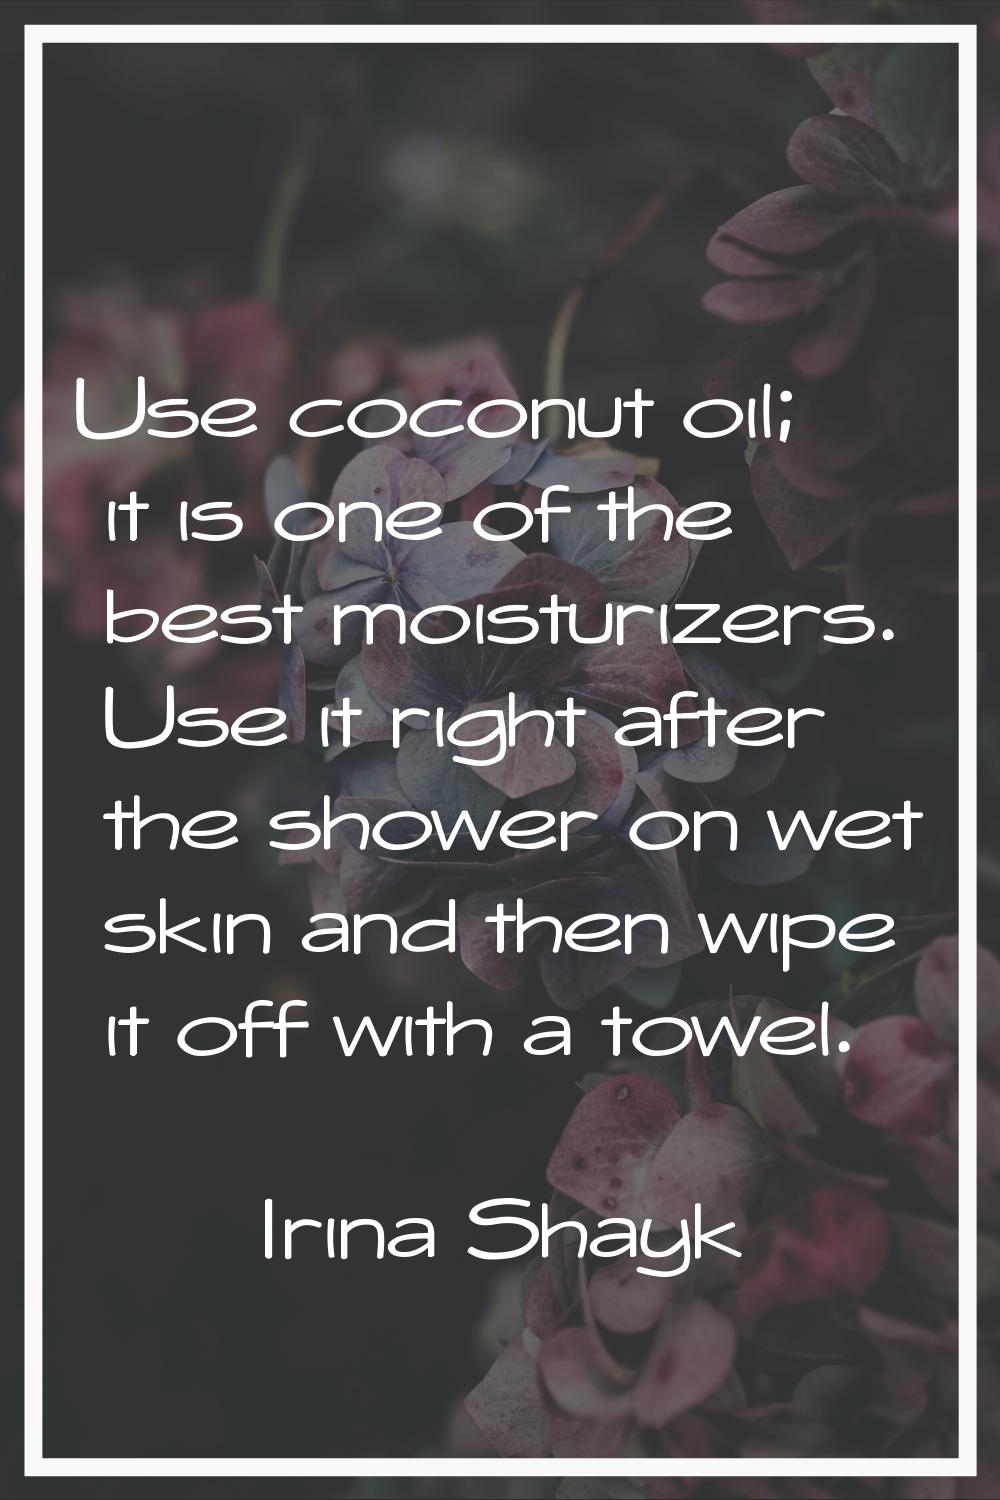 Use coconut oil; it is one of the best moisturizers. Use it right after the shower on wet skin and 